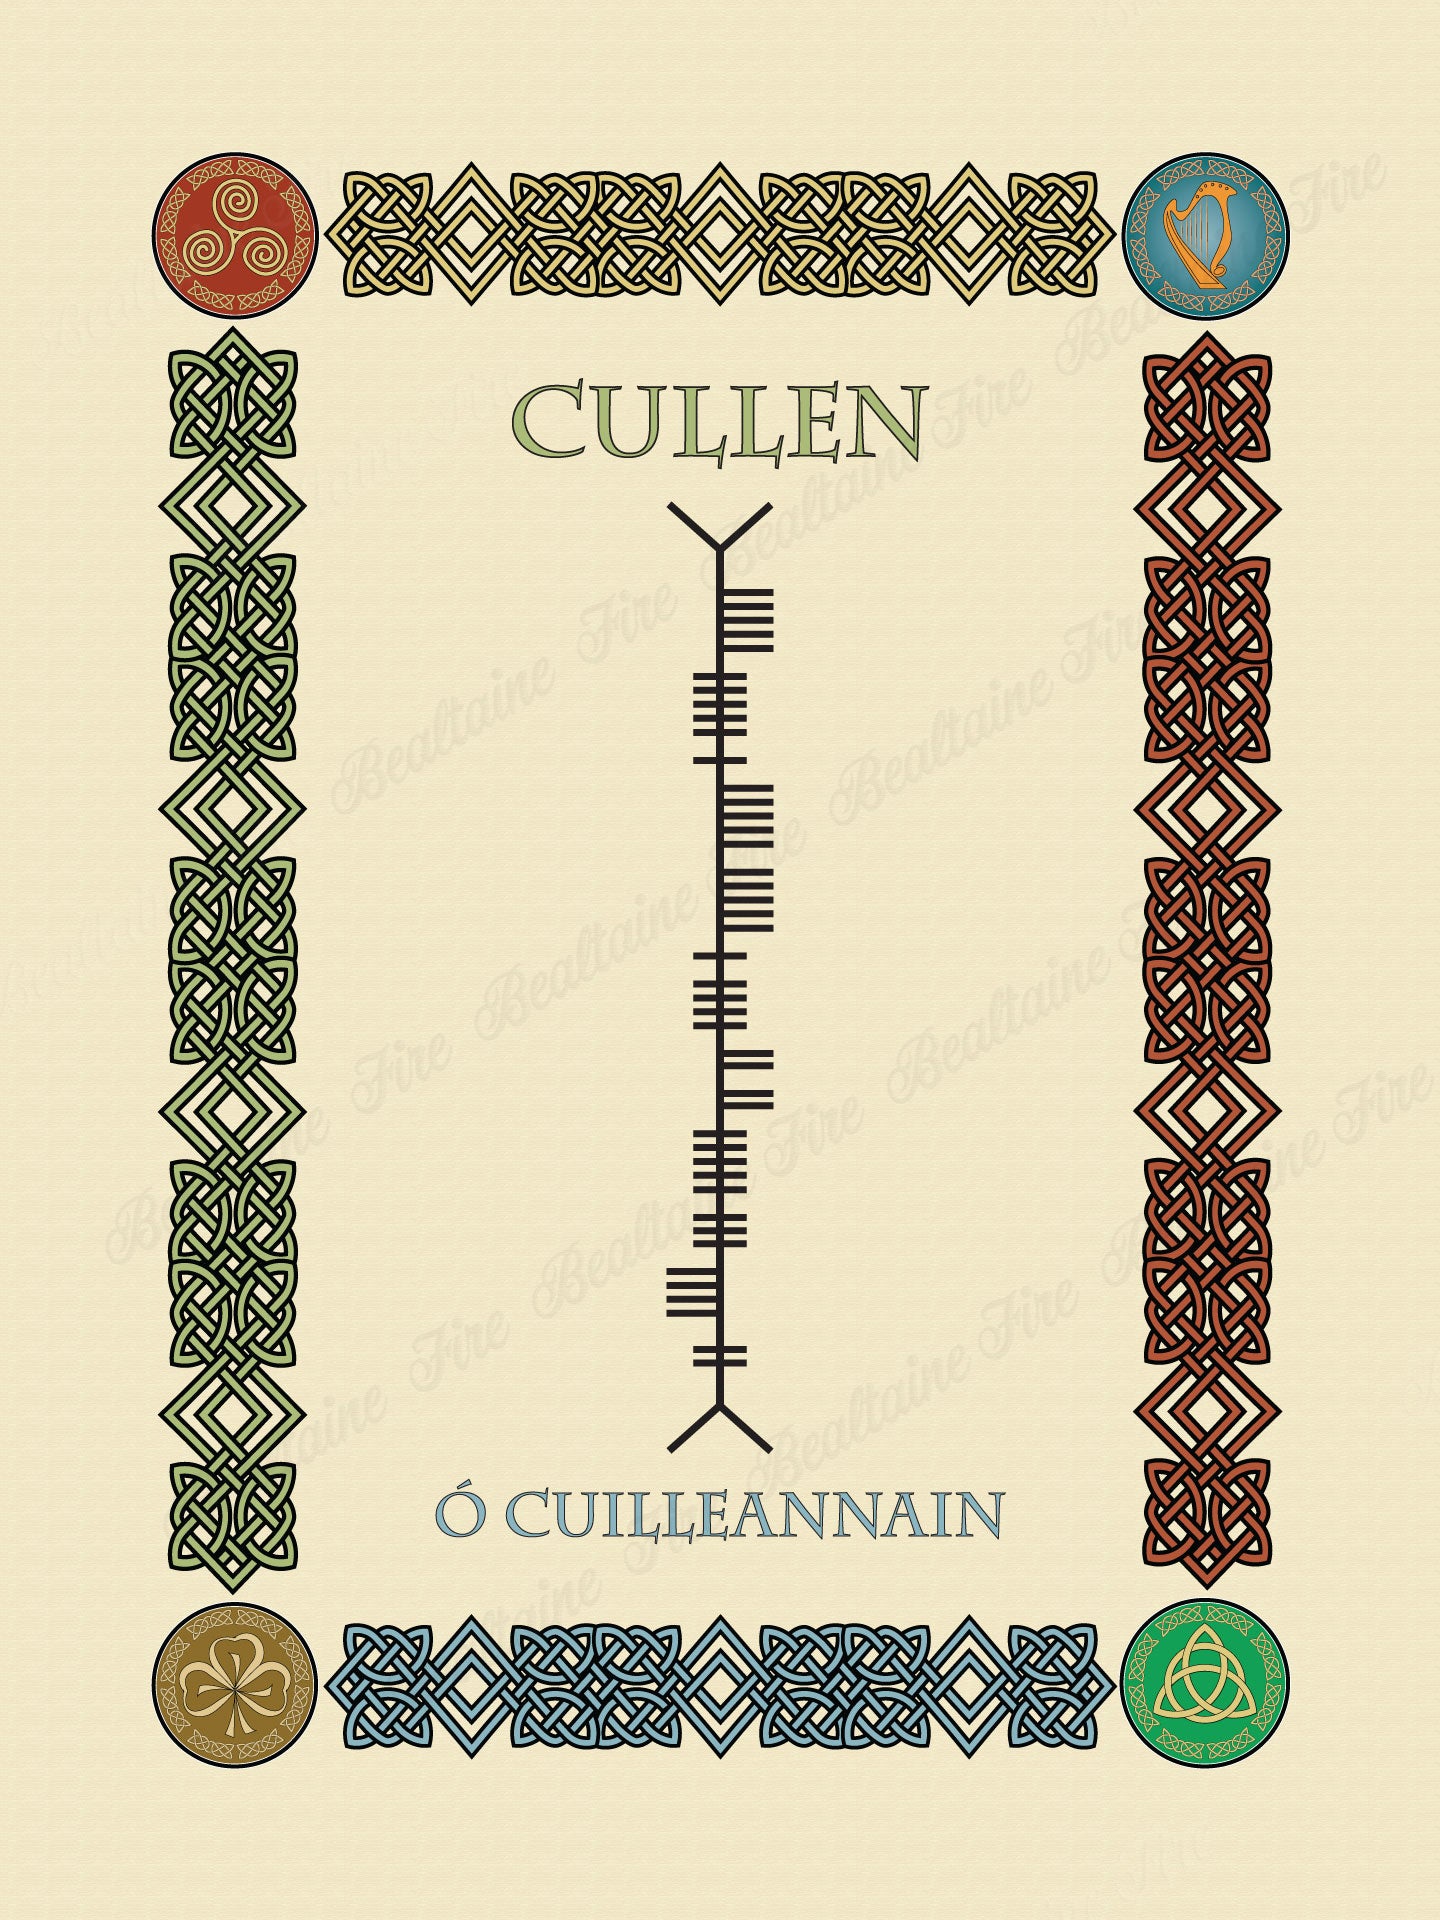 Cullen in Old Irish and Ogham - PDF Download